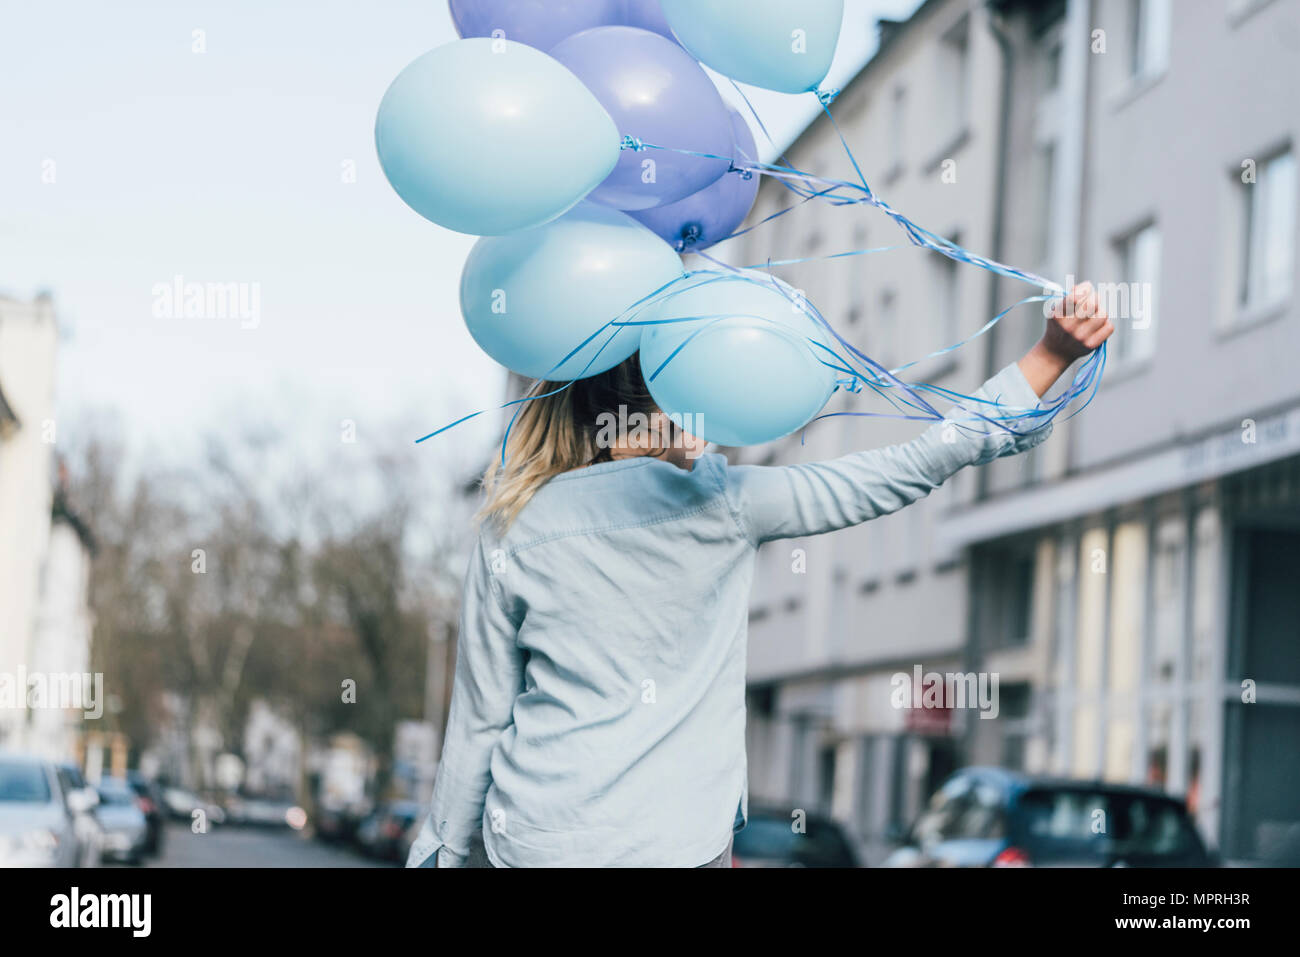 Back view of woman with blue balloons Stock Photo